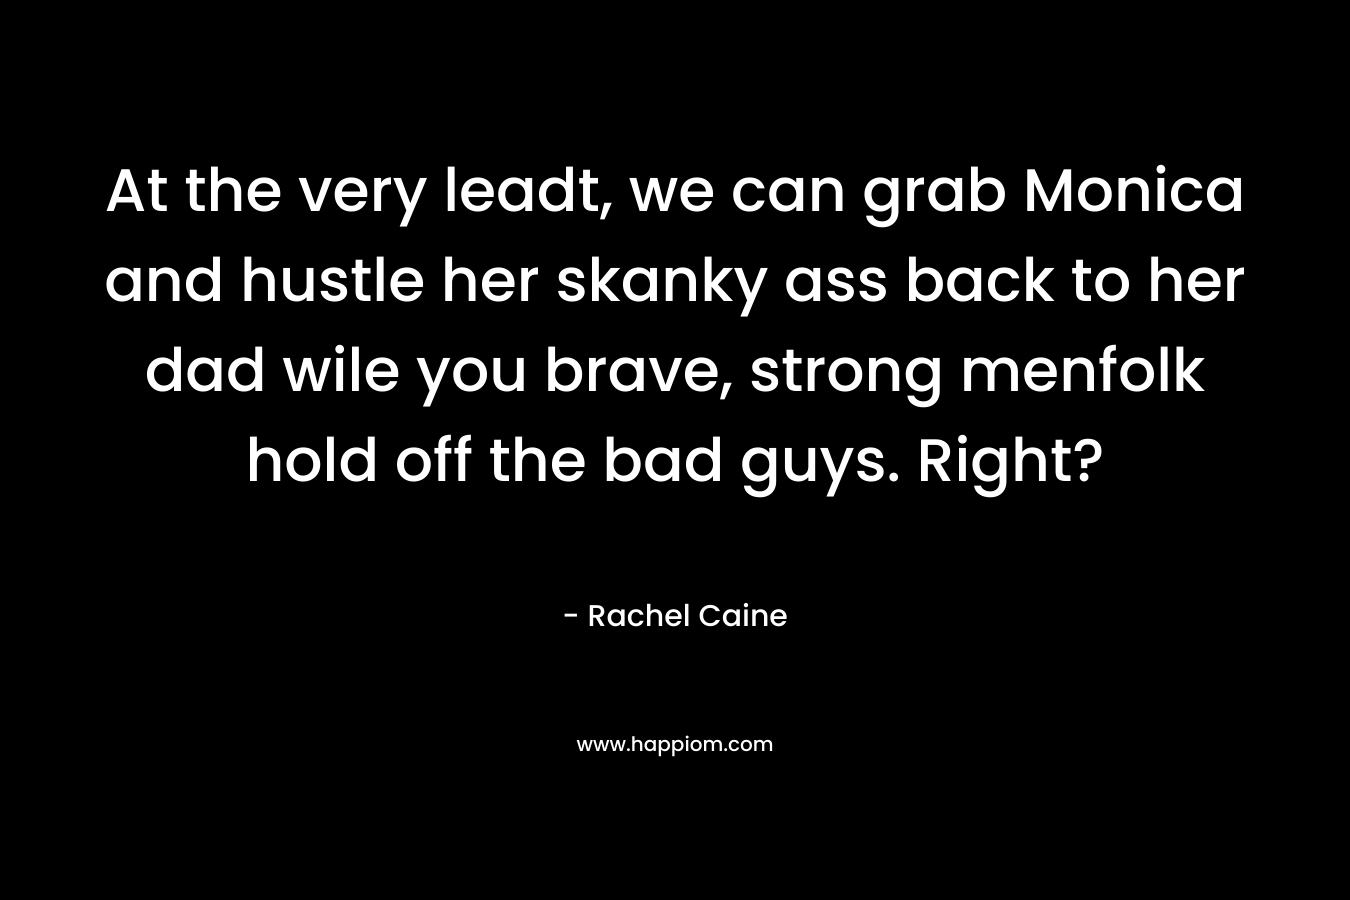 At the very leadt, we can grab Monica and hustle her skanky ass back to her dad wile you brave, strong menfolk hold off the bad guys. Right?